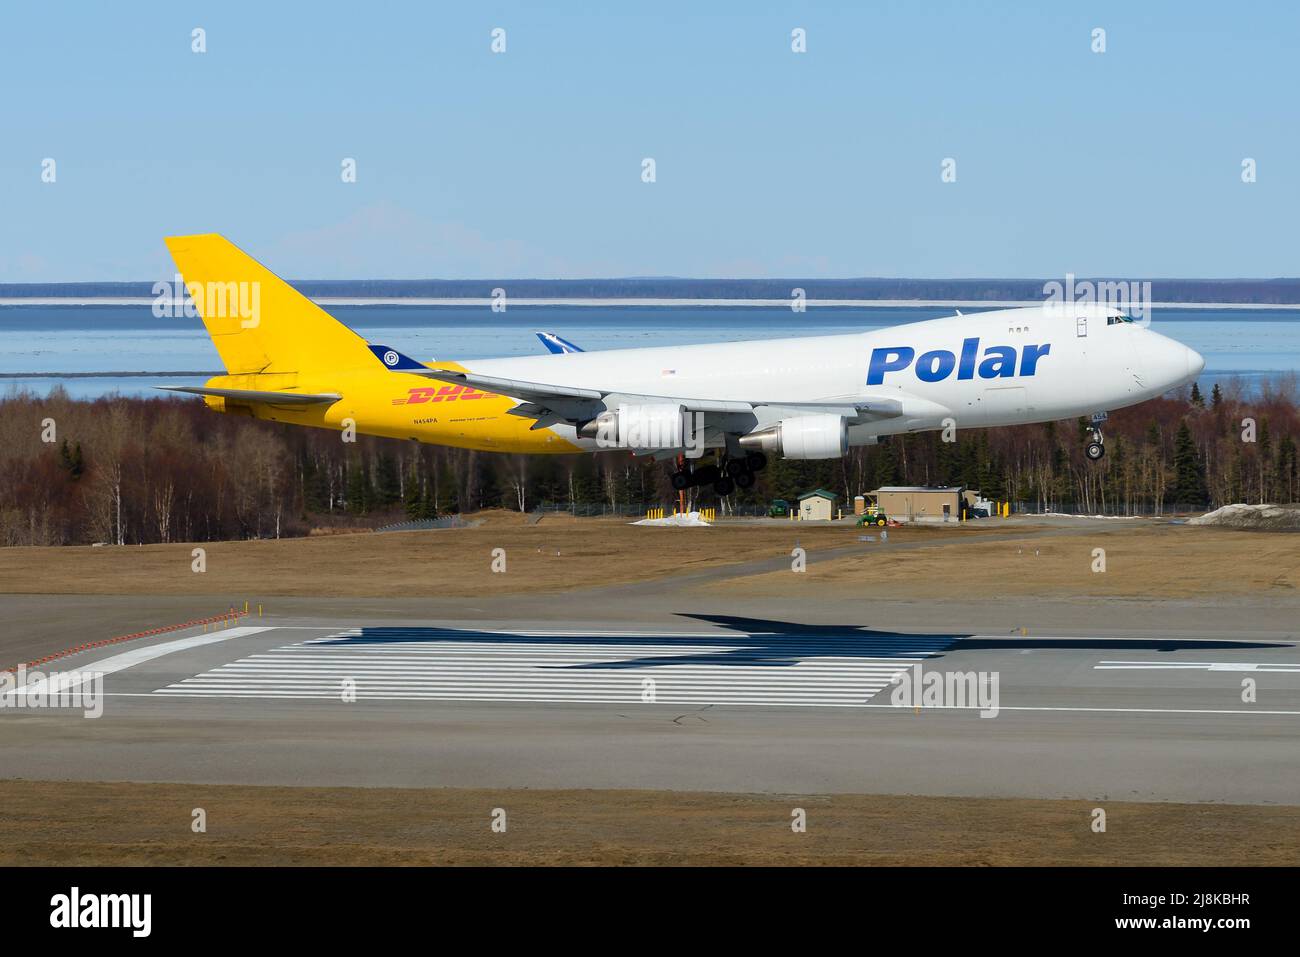 Polar Air Cargo Boeing 747-400 airplane landing. Plane 747-400F for cargo transport of Polar Air arriving. Aircraft 747-400 freighter N454PA for DHL. Stock Photo